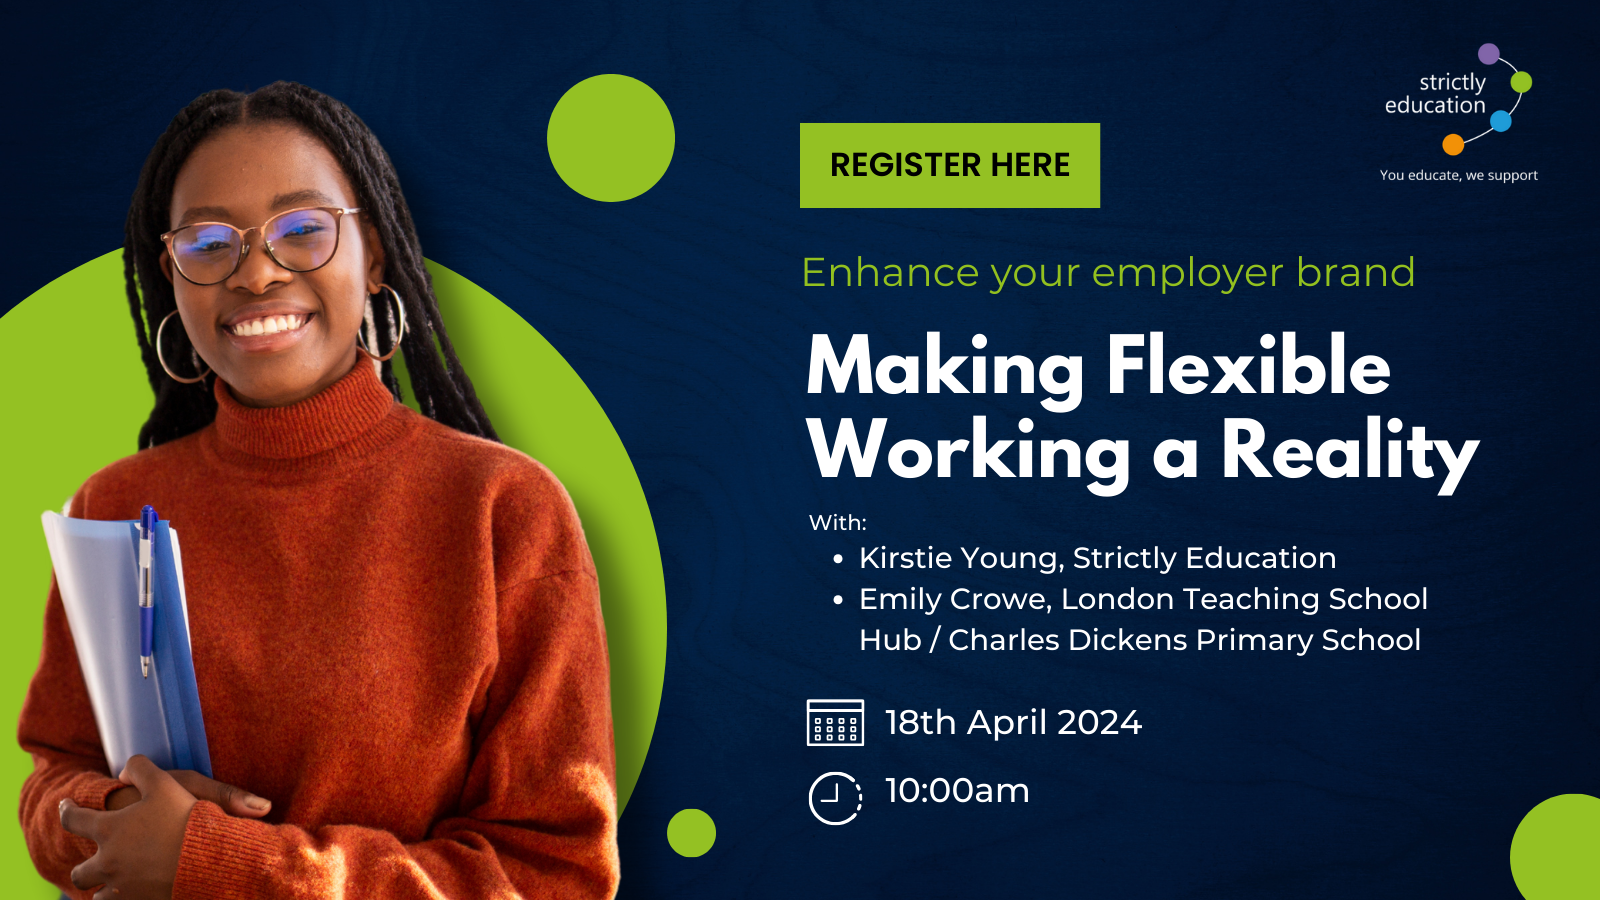  Enhance your employer brand by making flexible working a reality in your school